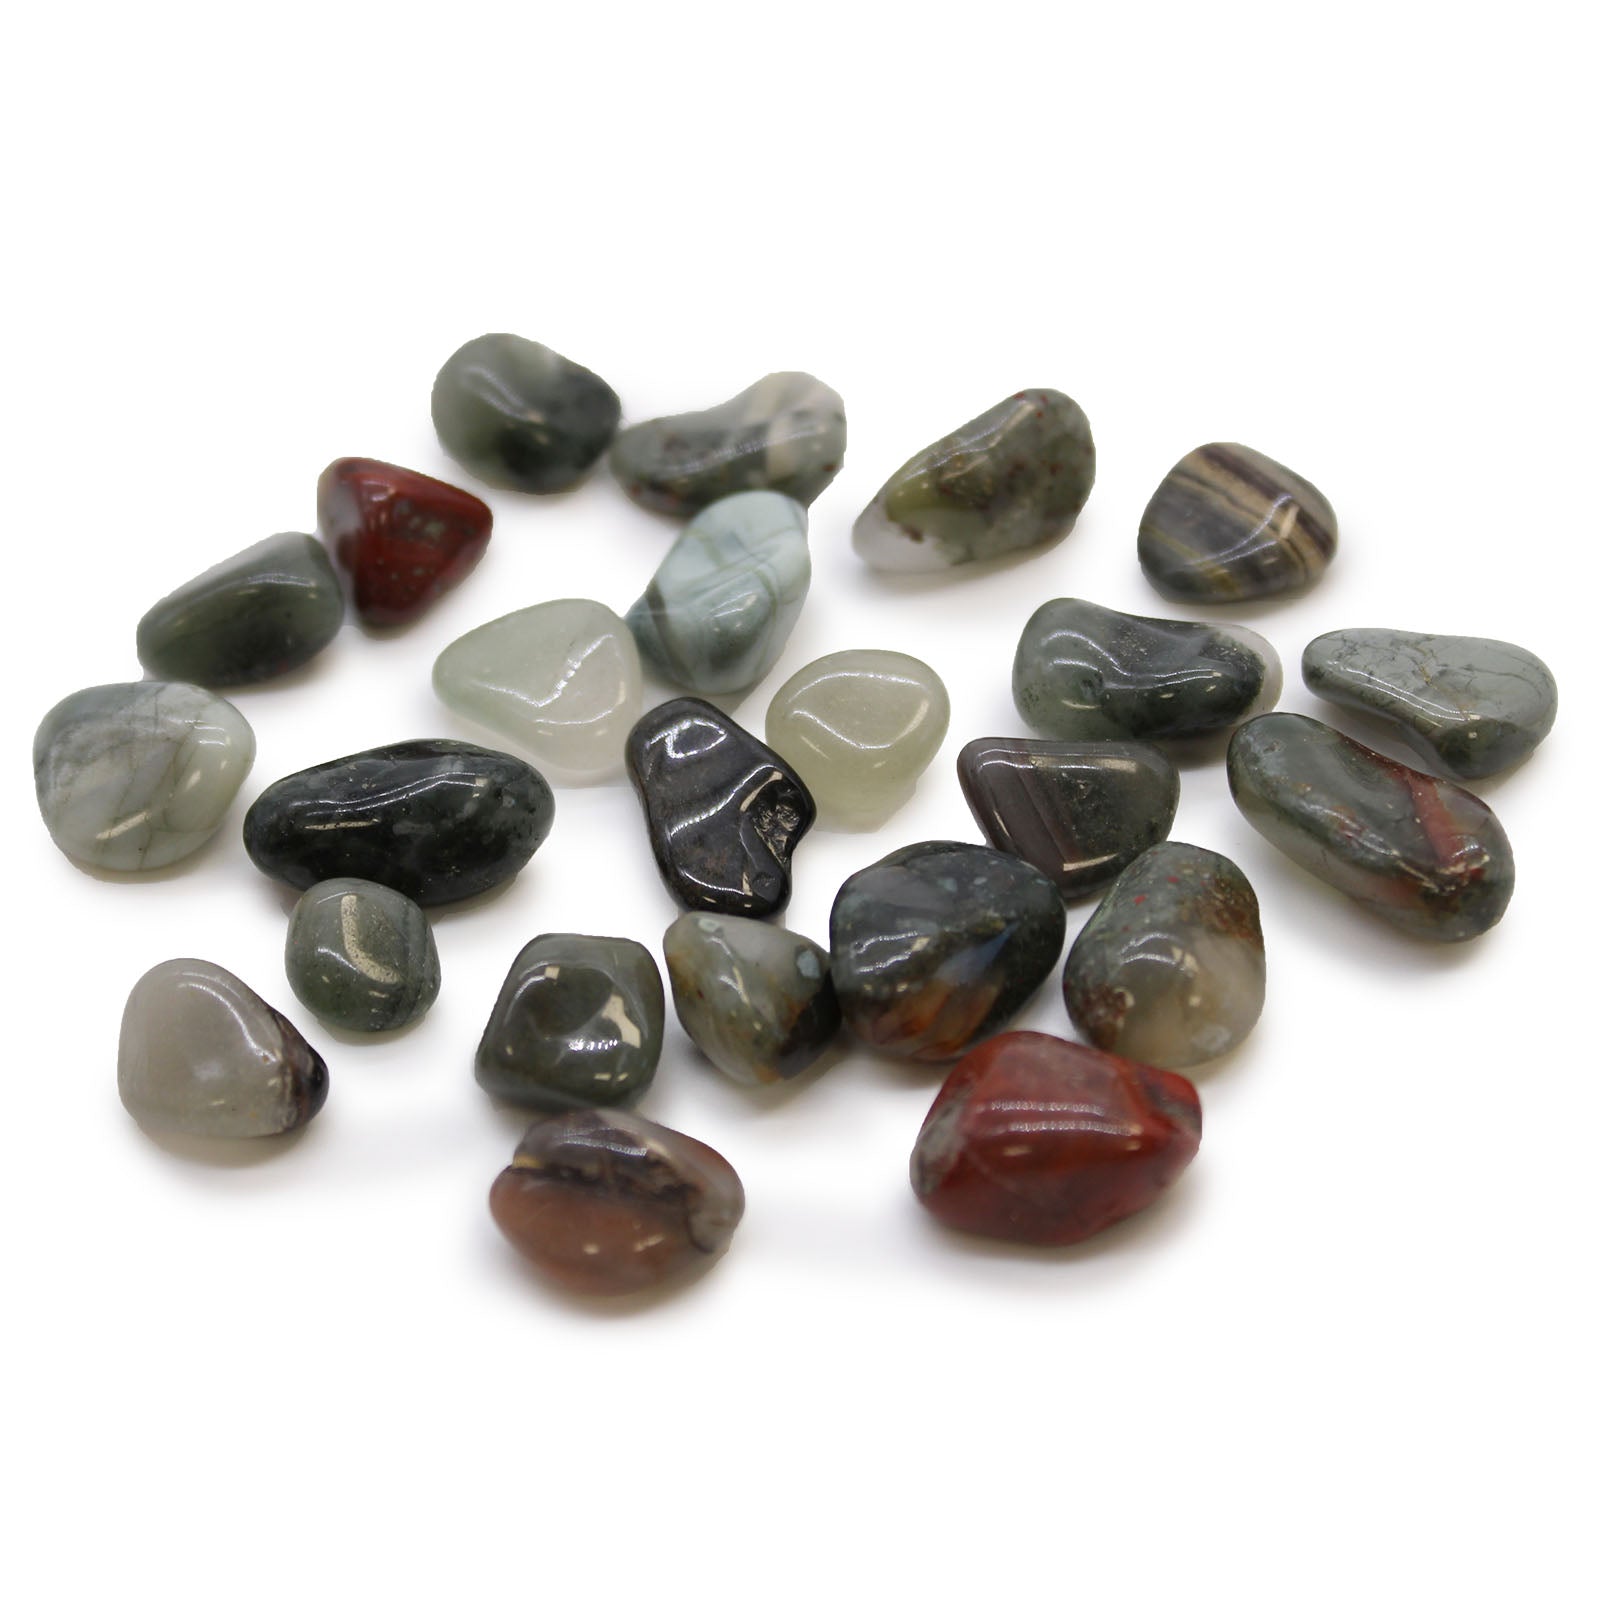 View Small African Tumble Stones Bloodstone Sephtonite information